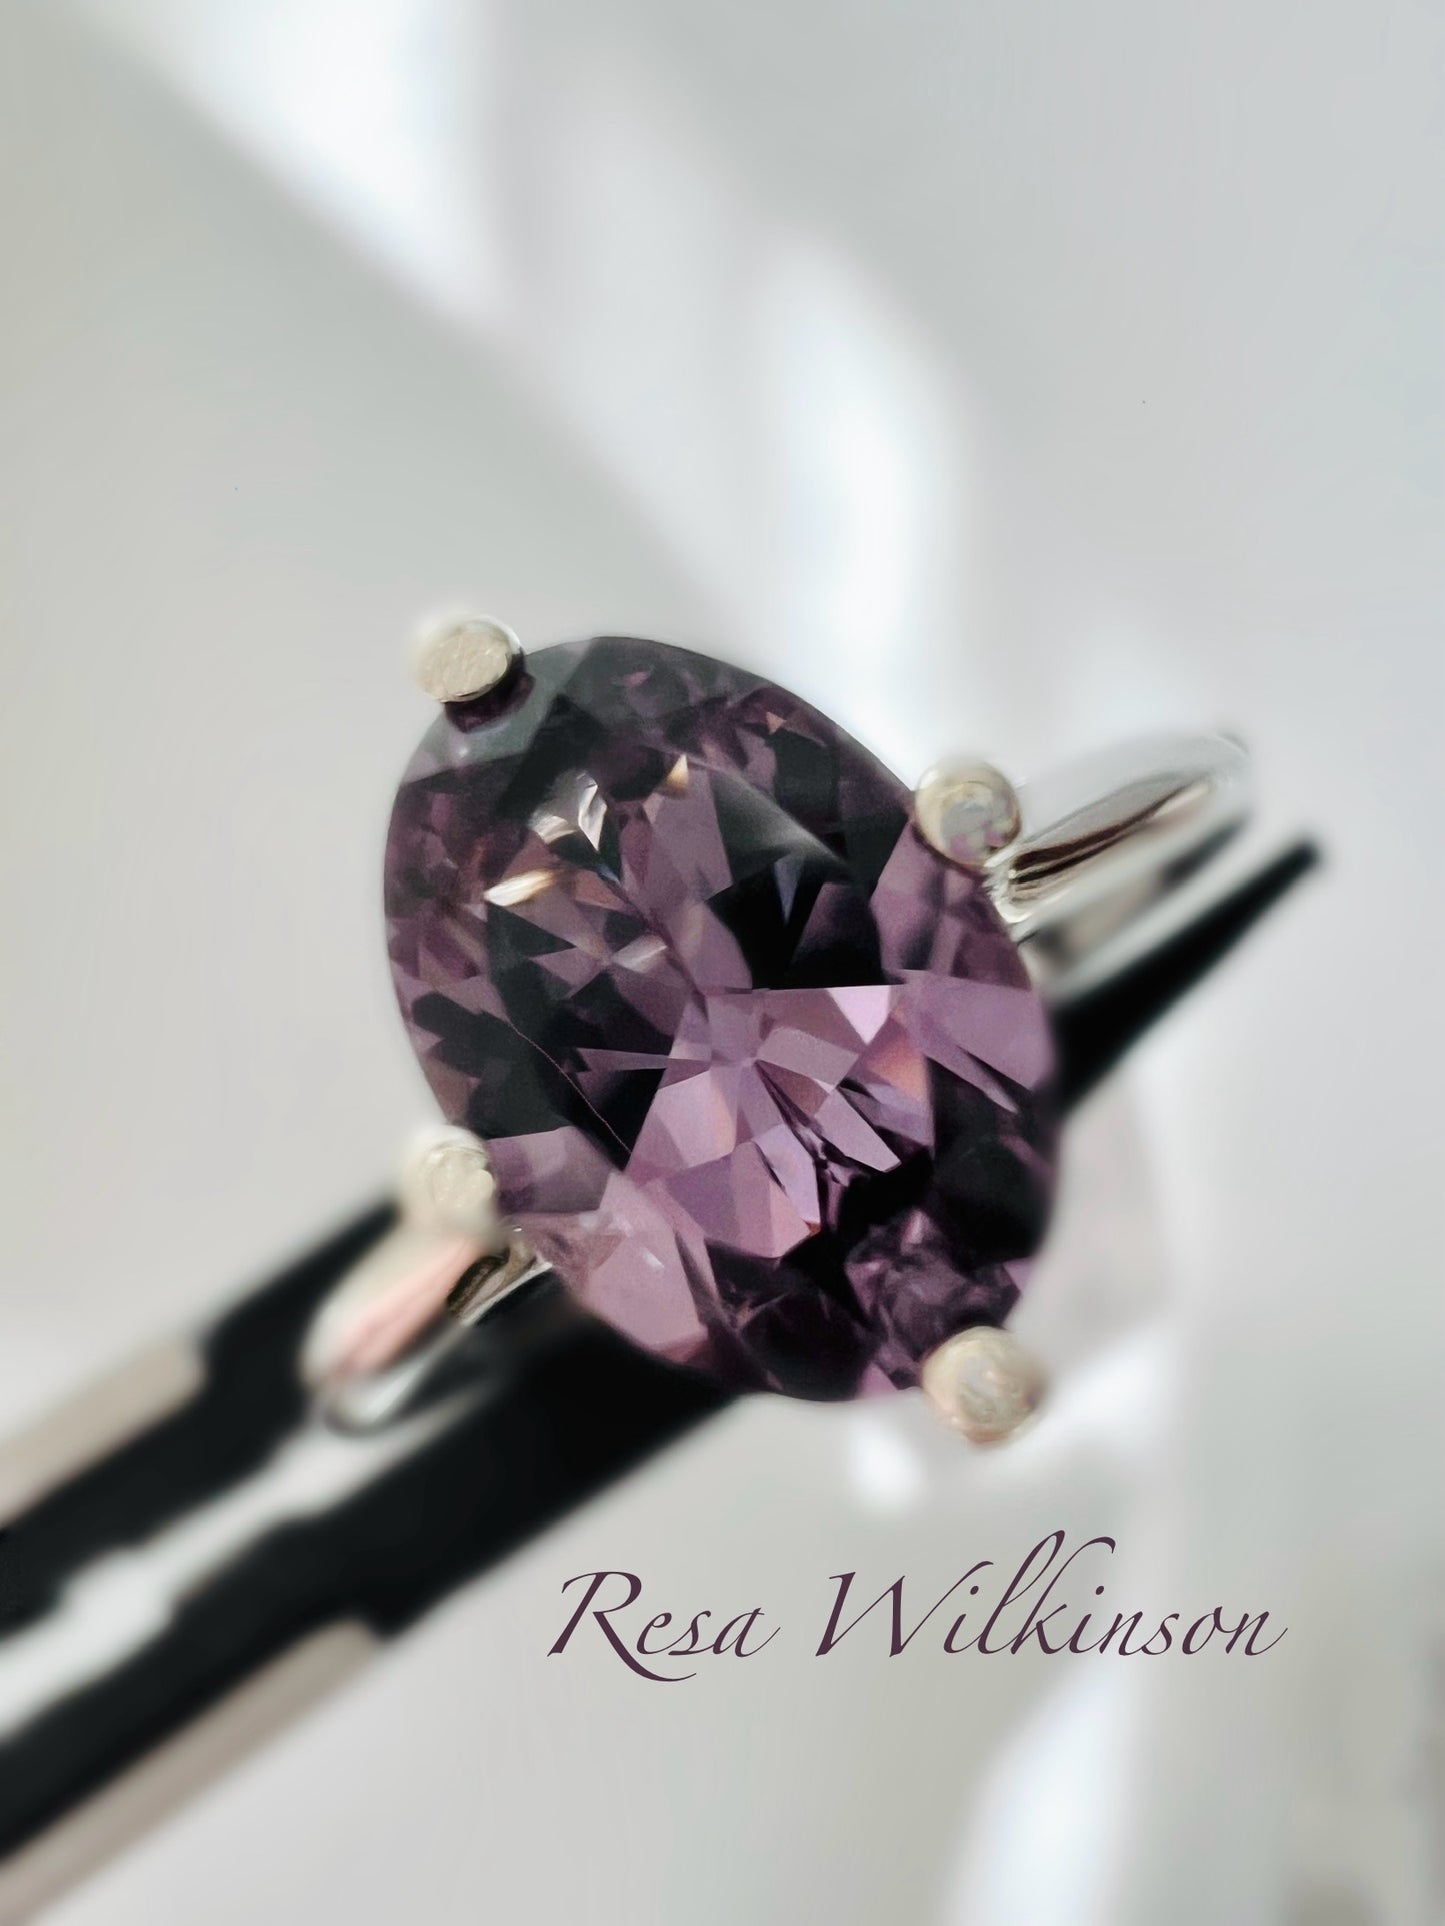 Natural Oval Purple Spinel Engagement Ring